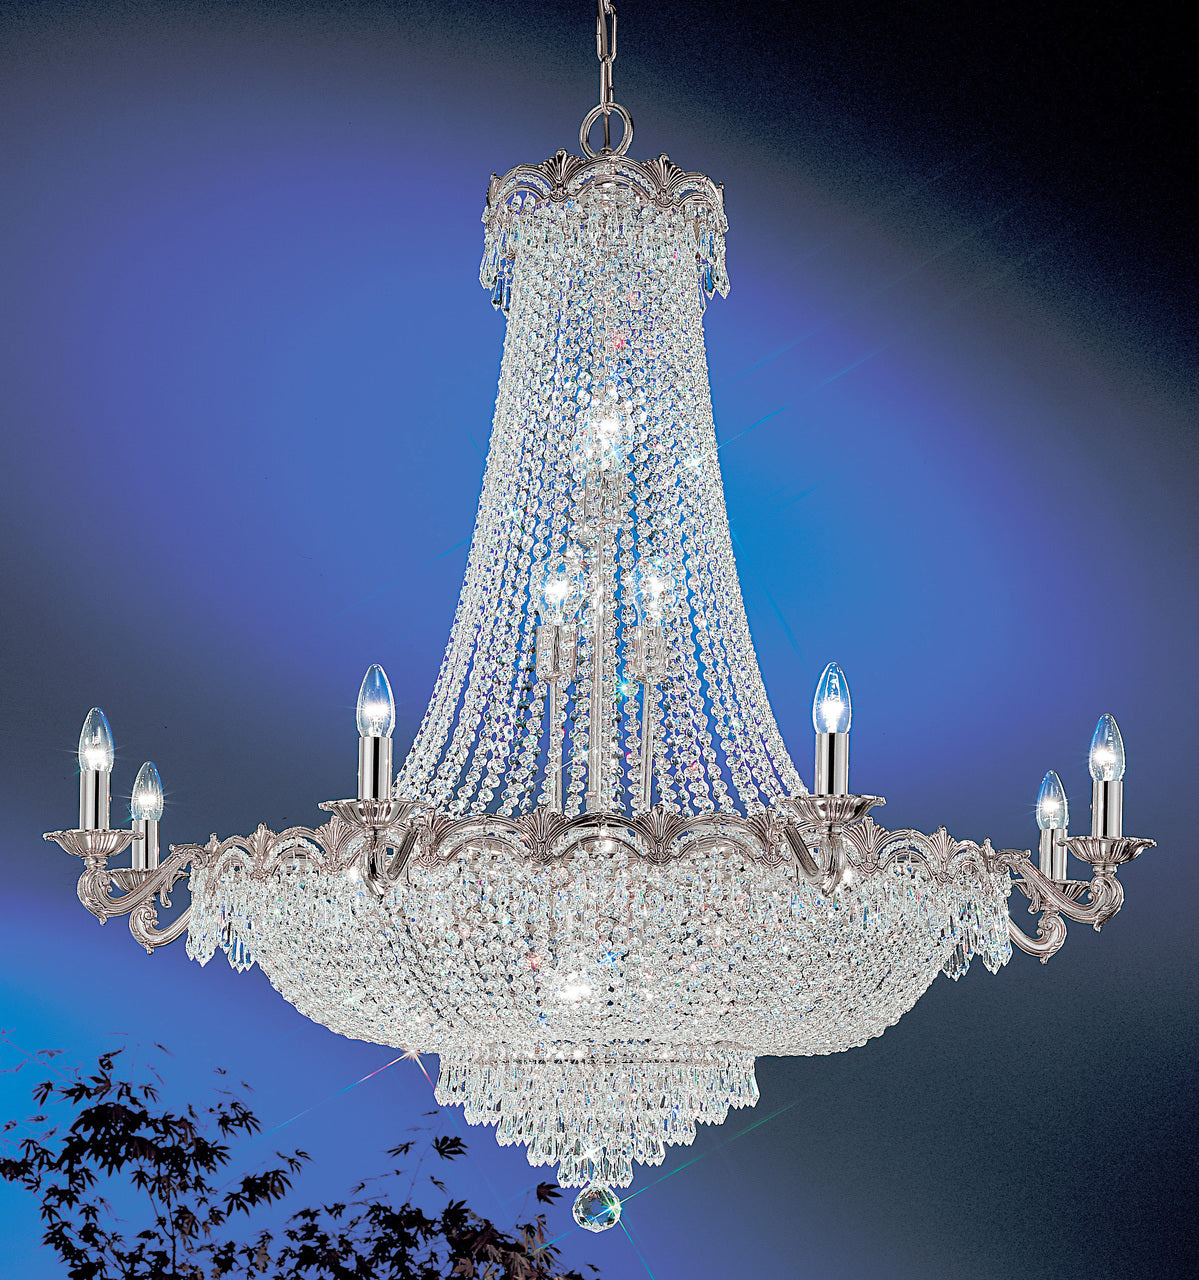 Classic Lighting 1860 CHB CP Regency II Crystal Chandelier in Chrome/Black Patina (Imported from Spain)